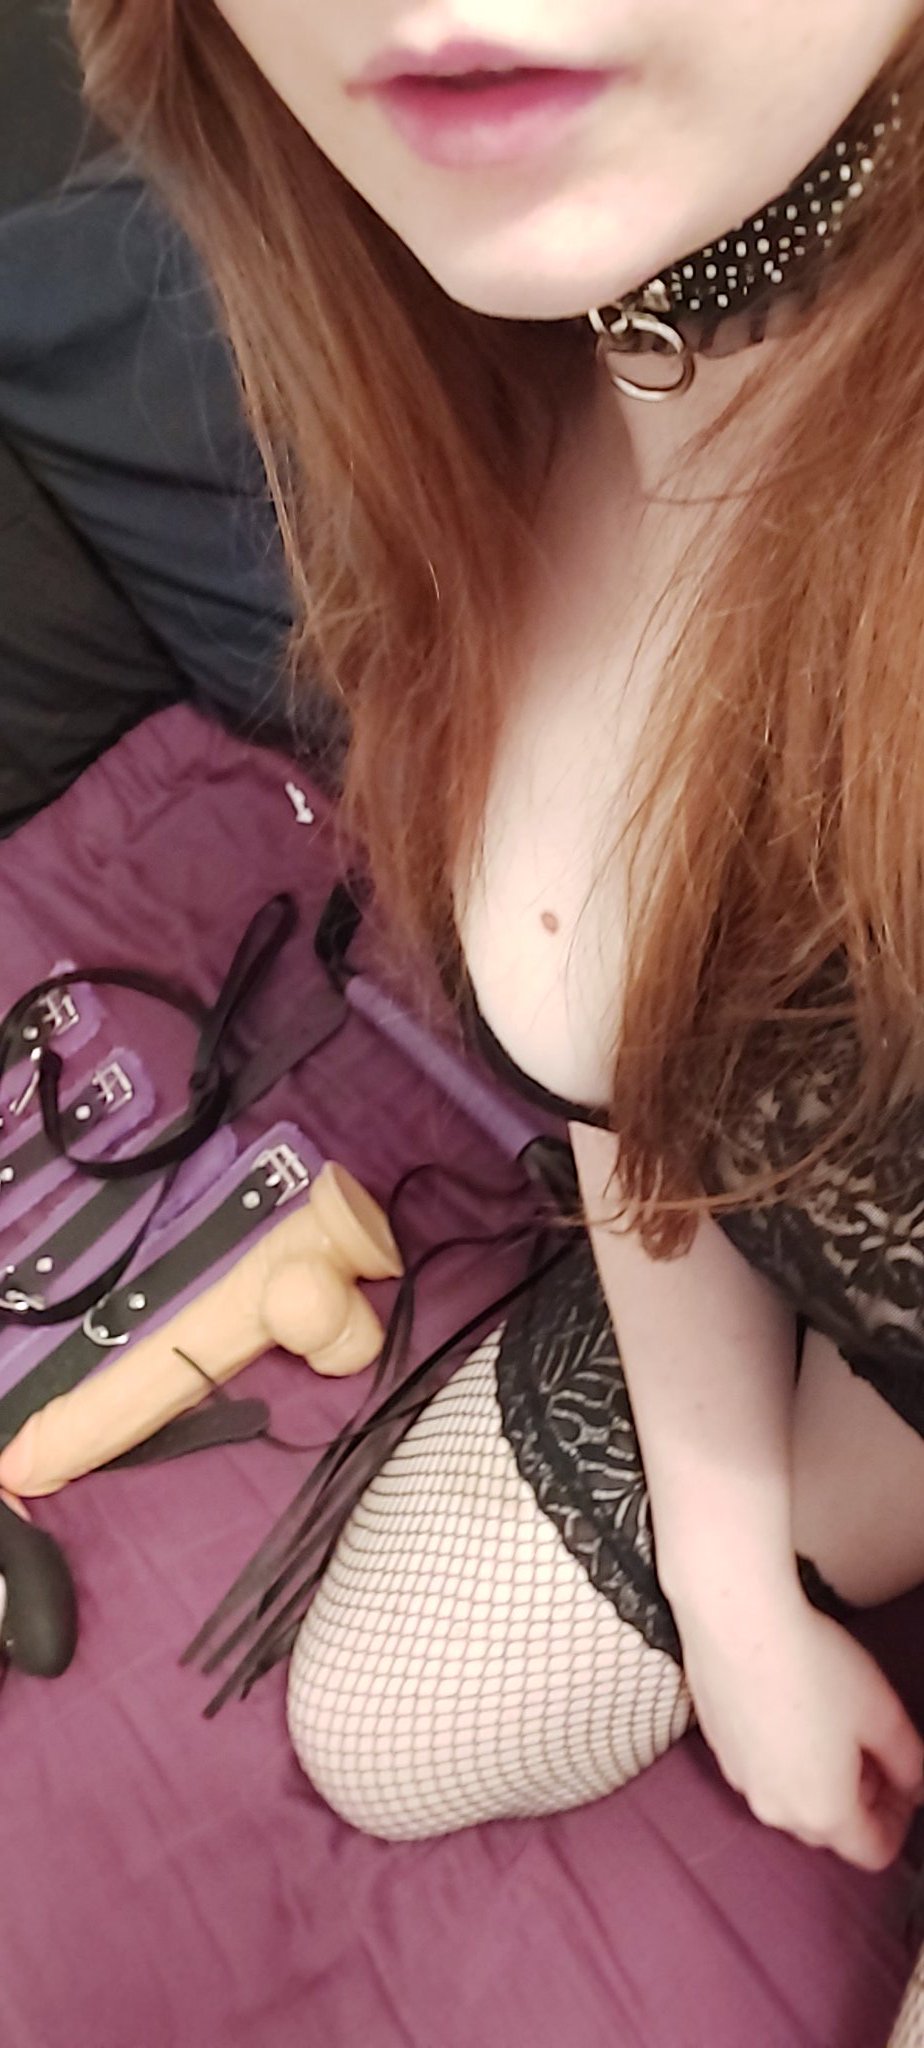 Collared Redhead Porn Starlets - TW Pornstars - Daliah Blue. Twitter. Please play with me? ðŸ˜ˆ #redhead #pale  #bondange #bdsm #sextoys #toys #collared. 4:55 AM - 5 May 2020